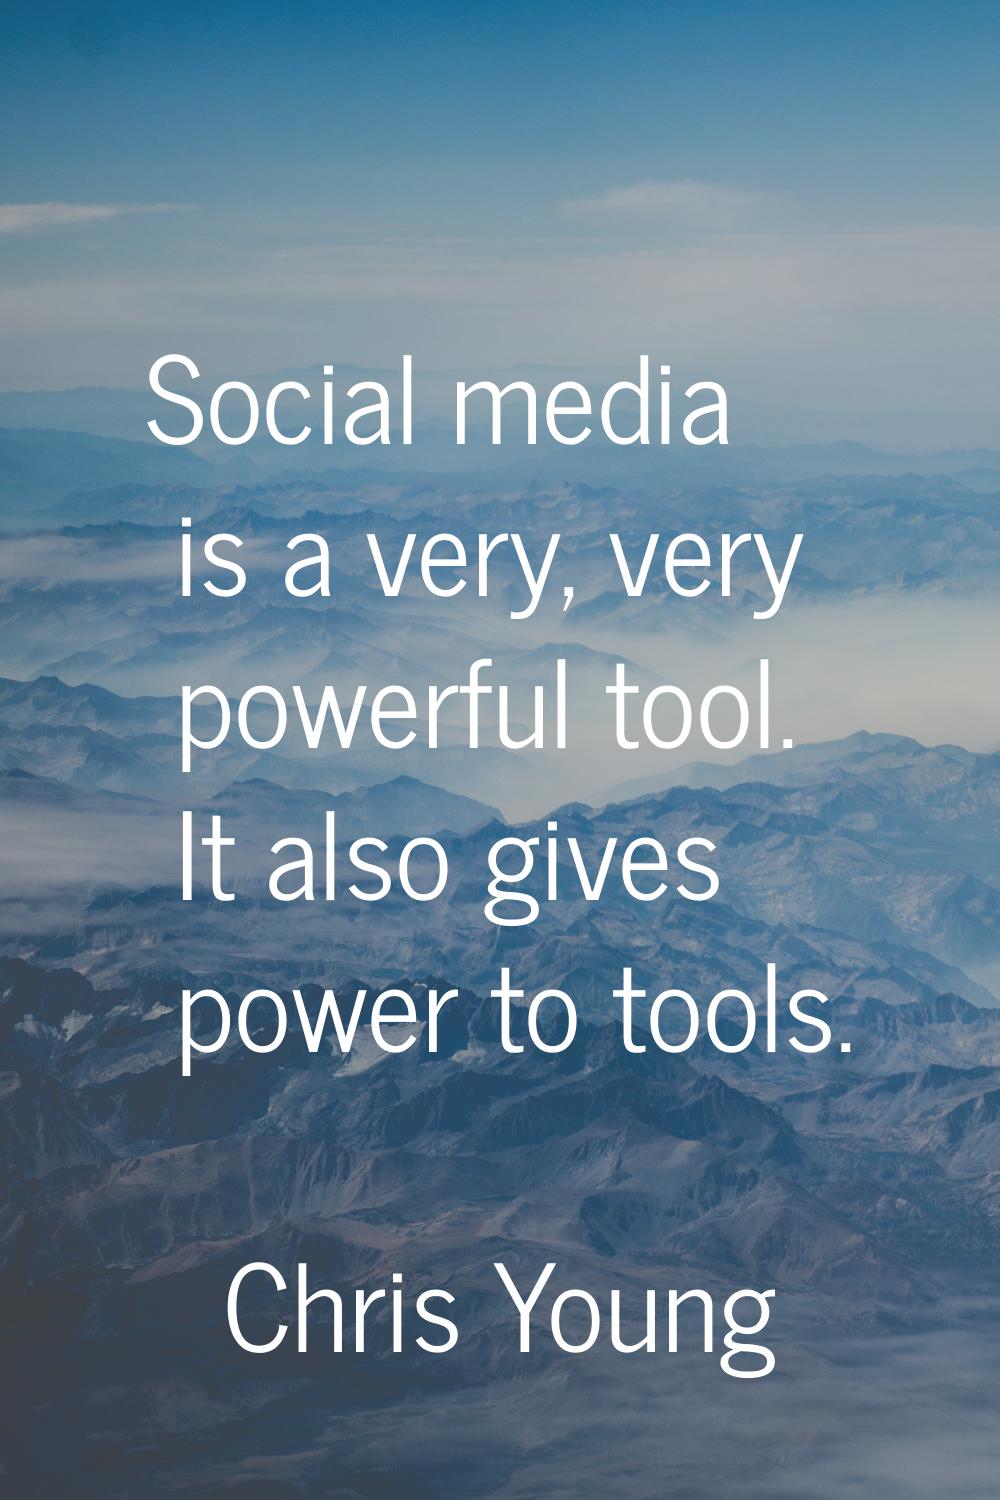 Social media is a very, very powerful tool. It also gives power to tools.